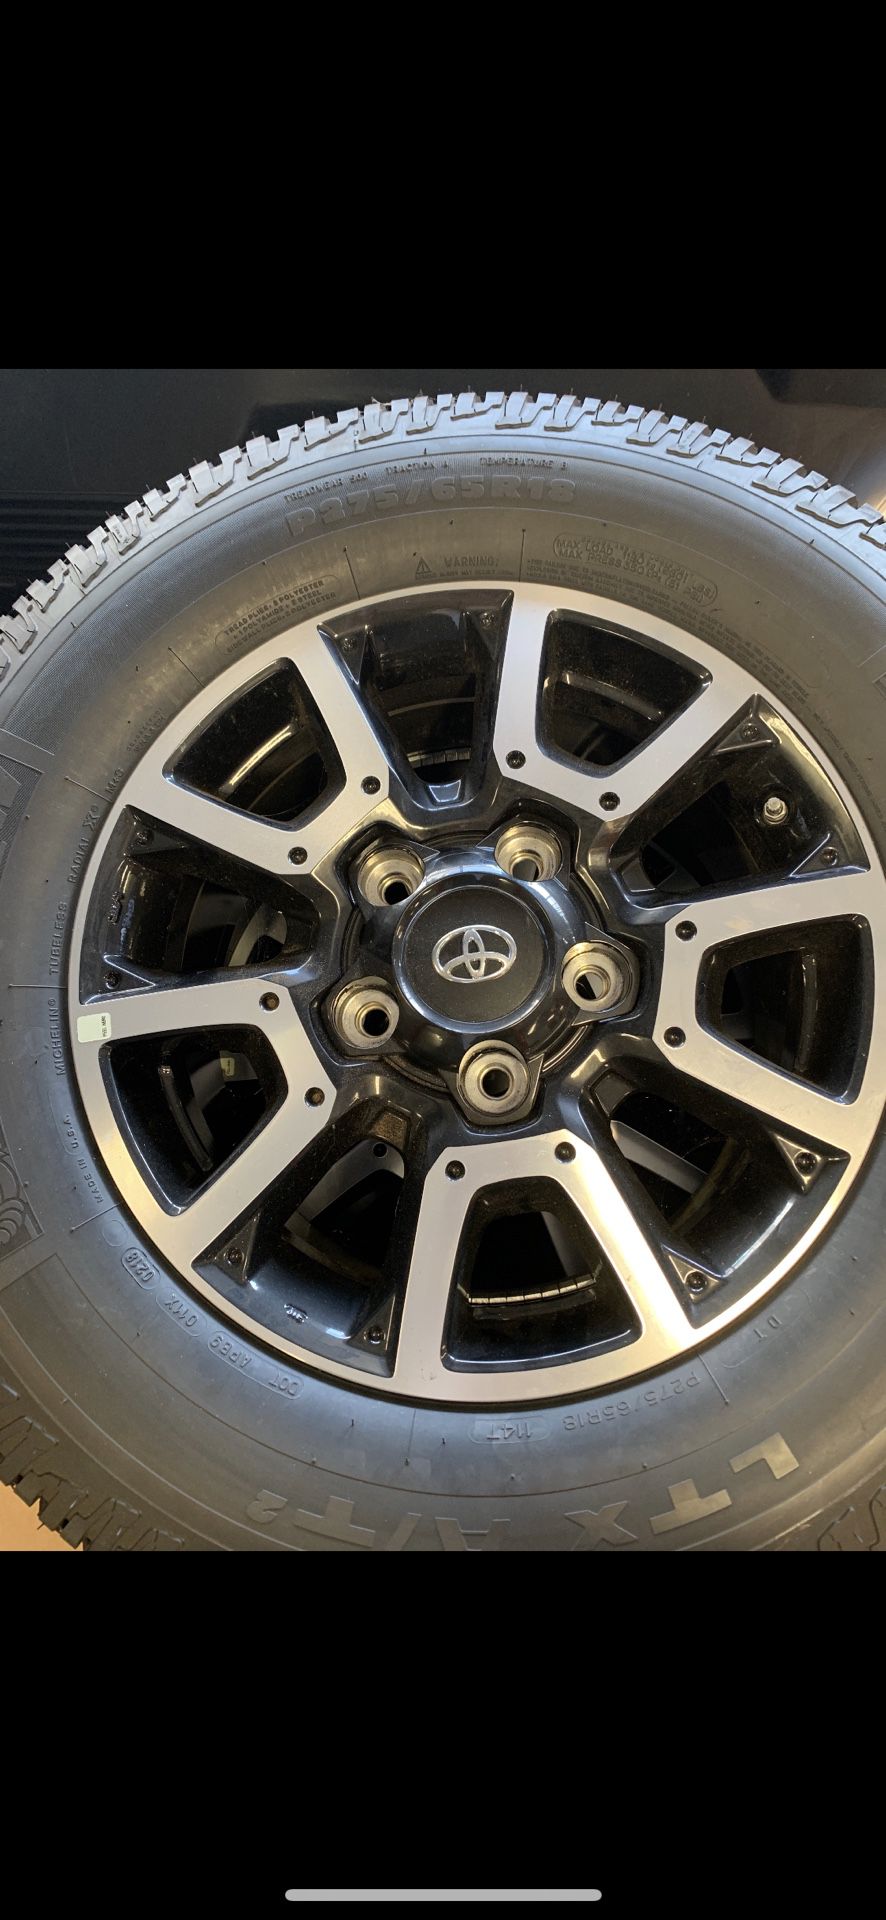 Tundra Wheels with option of /Tires and TPMS sensors.